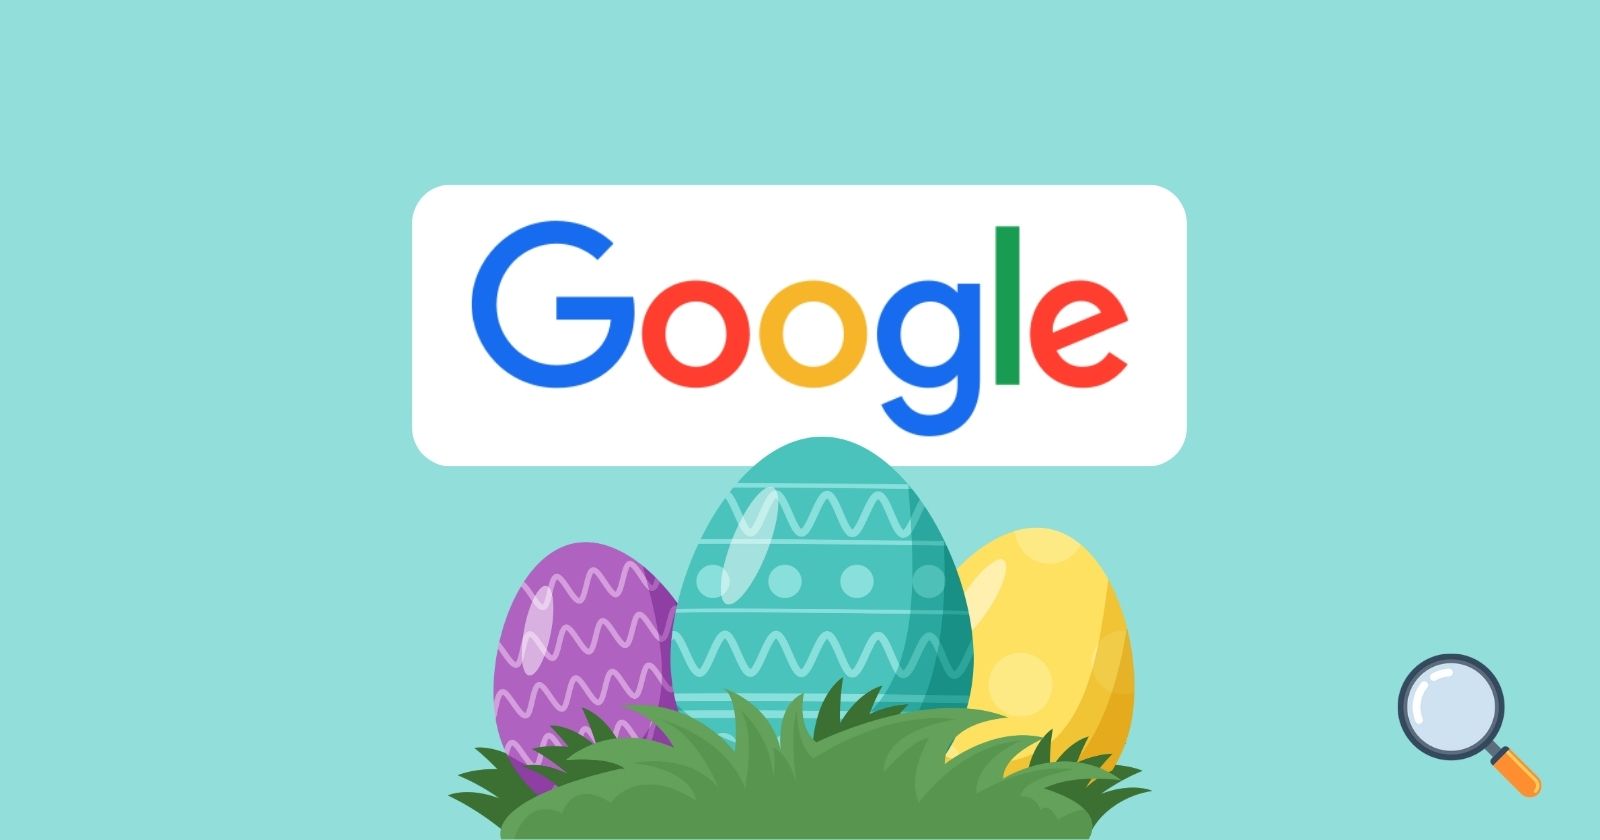 10 amazing Google Search Easter eggs I tested on my Pixel phone